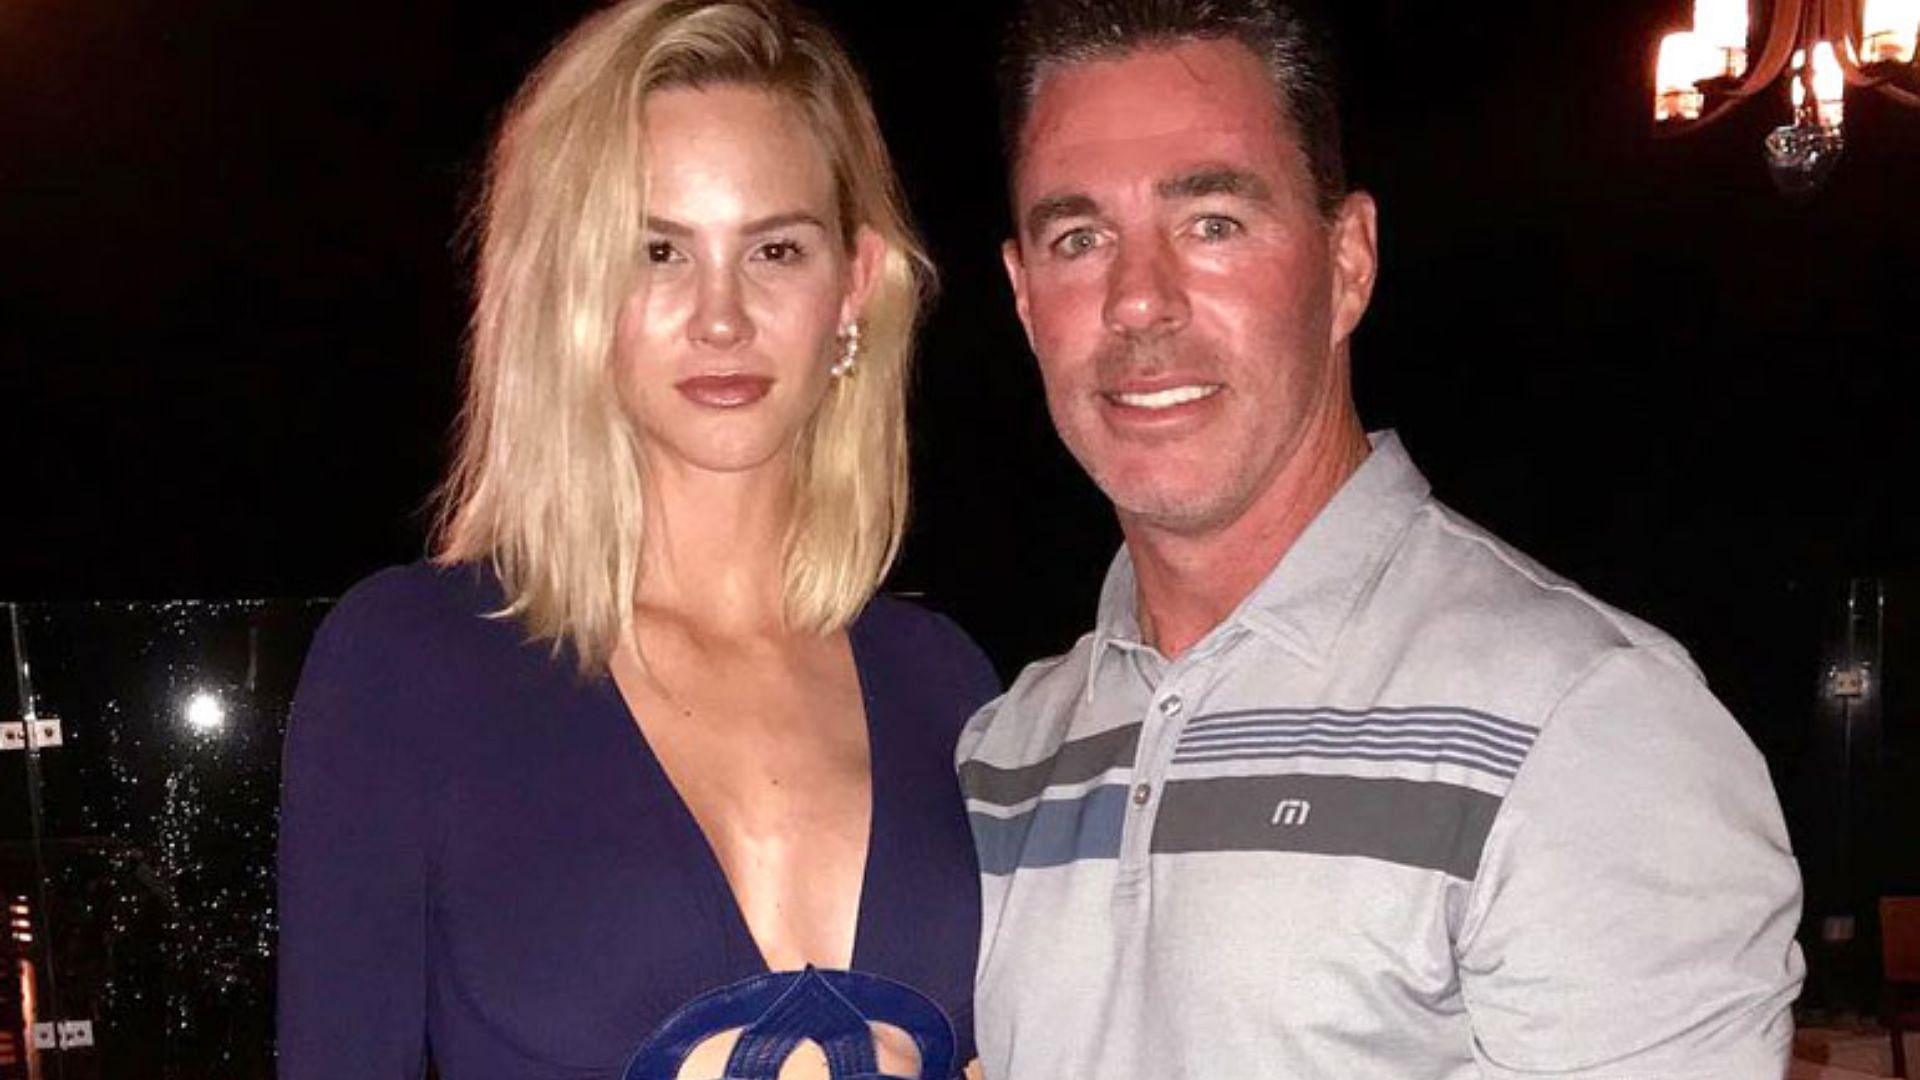 Jim Edmonds, St. Louis Cardinals icon and the real housewives